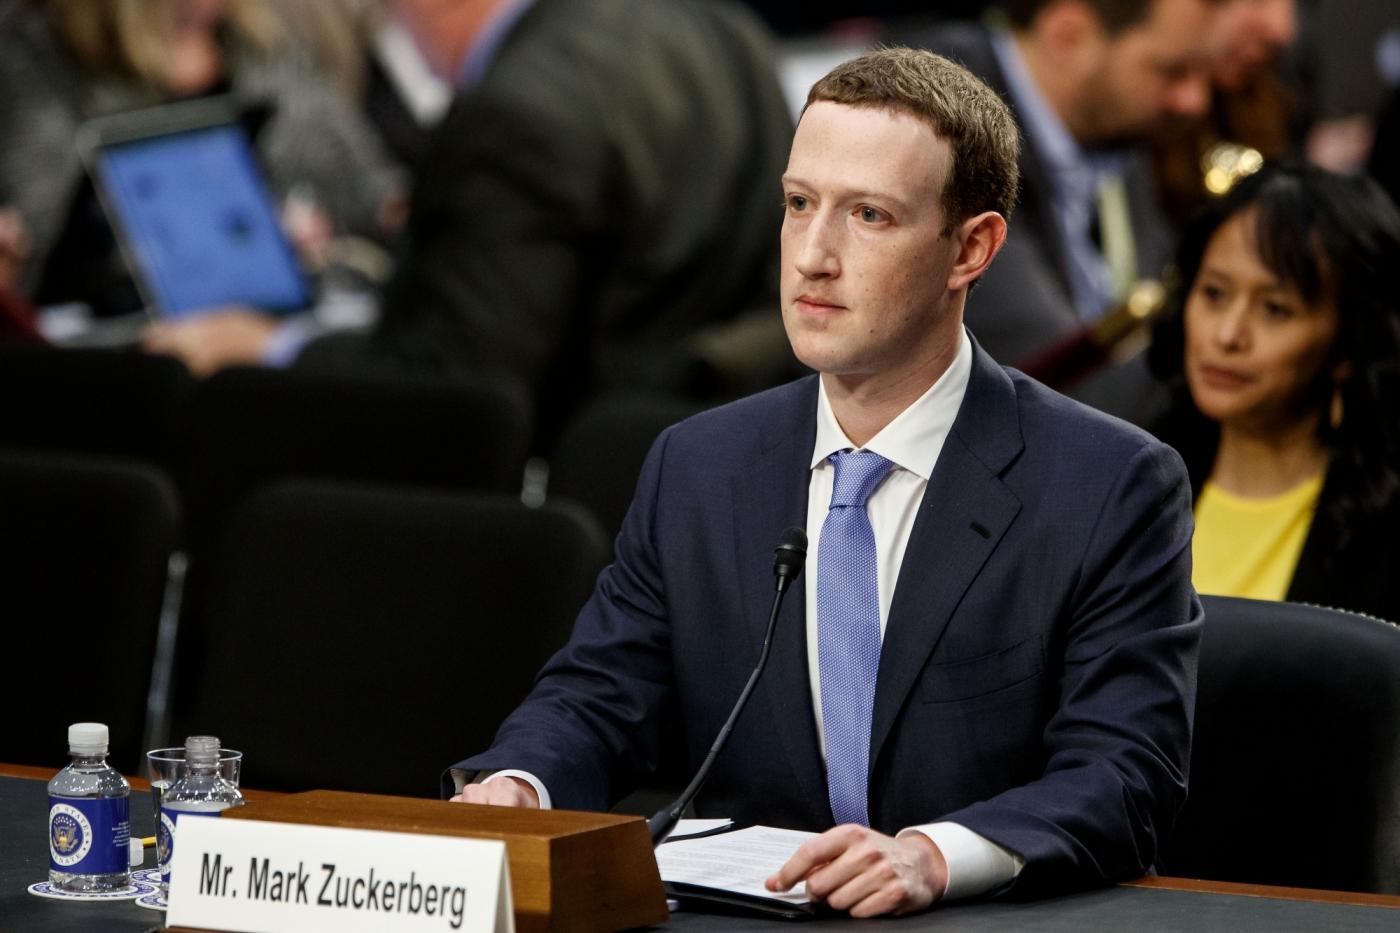 WASHINGTON, April 10, 2018 (Xinhua) -- Facebook CEO Mark Zuckerberg testifies at a joint hearing of the Senate Judiciary and Commerce committees on Capitol Hill in Washington D.C., United States, on April 10, 2018. Facebook CEO Mark Zuckerberg told Congress in written testimony on Monday that he is "responsible for" not preventing the social media platform from being used for harm, including fake news, foreign interference in elections and hate speech. (Xinhua/Ting Shen/IANS) by .